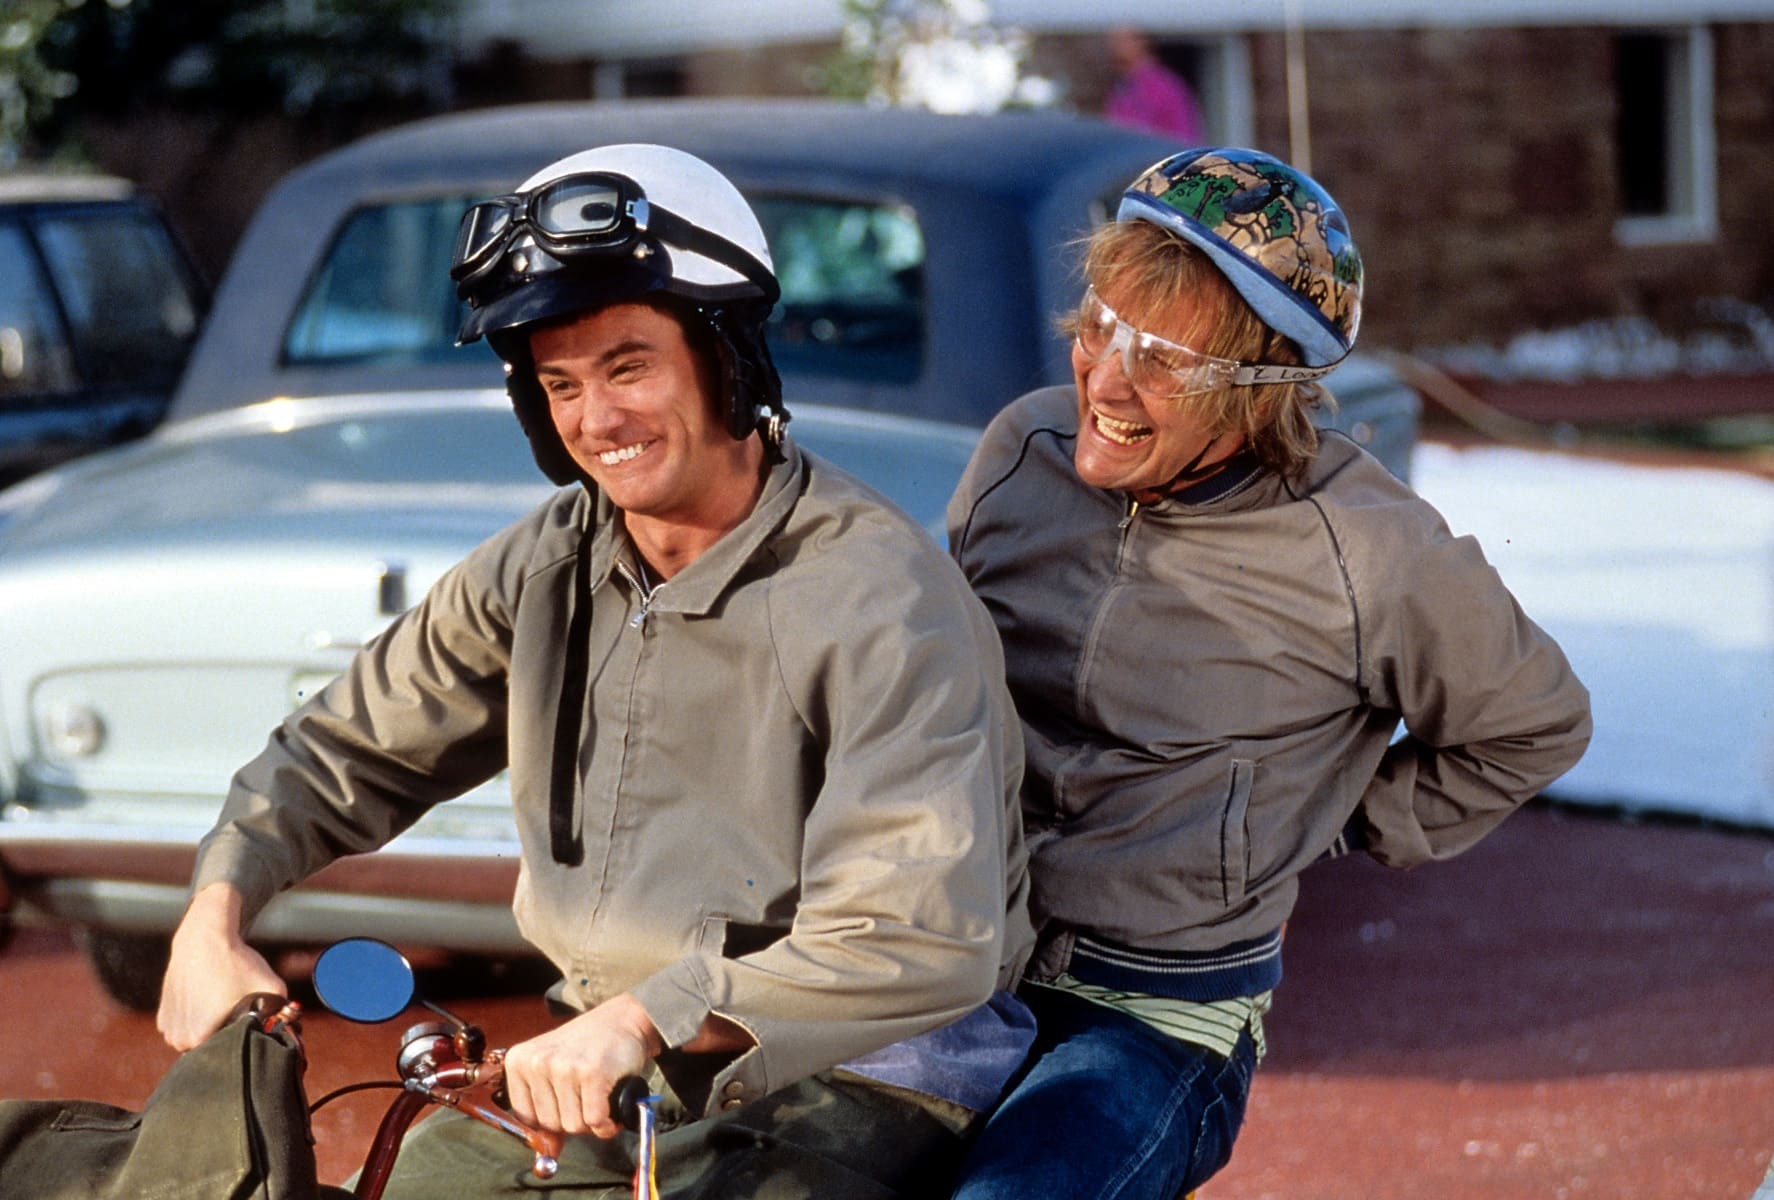 <p>Widely considered to be one of the <a href="https://time.com/5754196/dumb-and-dumber-25th-anniversary/">greatest comedies of all time</a>, <a href="https://www.imdb.com/title/tt0109686/"><em>Dumb and Dumber</em></a> showcases a journey from Rhode Island to Colorado that is full of as many shenanigans as one could possibly pack into 107 minutes. The movie’s popularity has led to two sequels and even an animated television show, as people couldn’t get enough of watching these two goofballs have fun on the road together.</p>